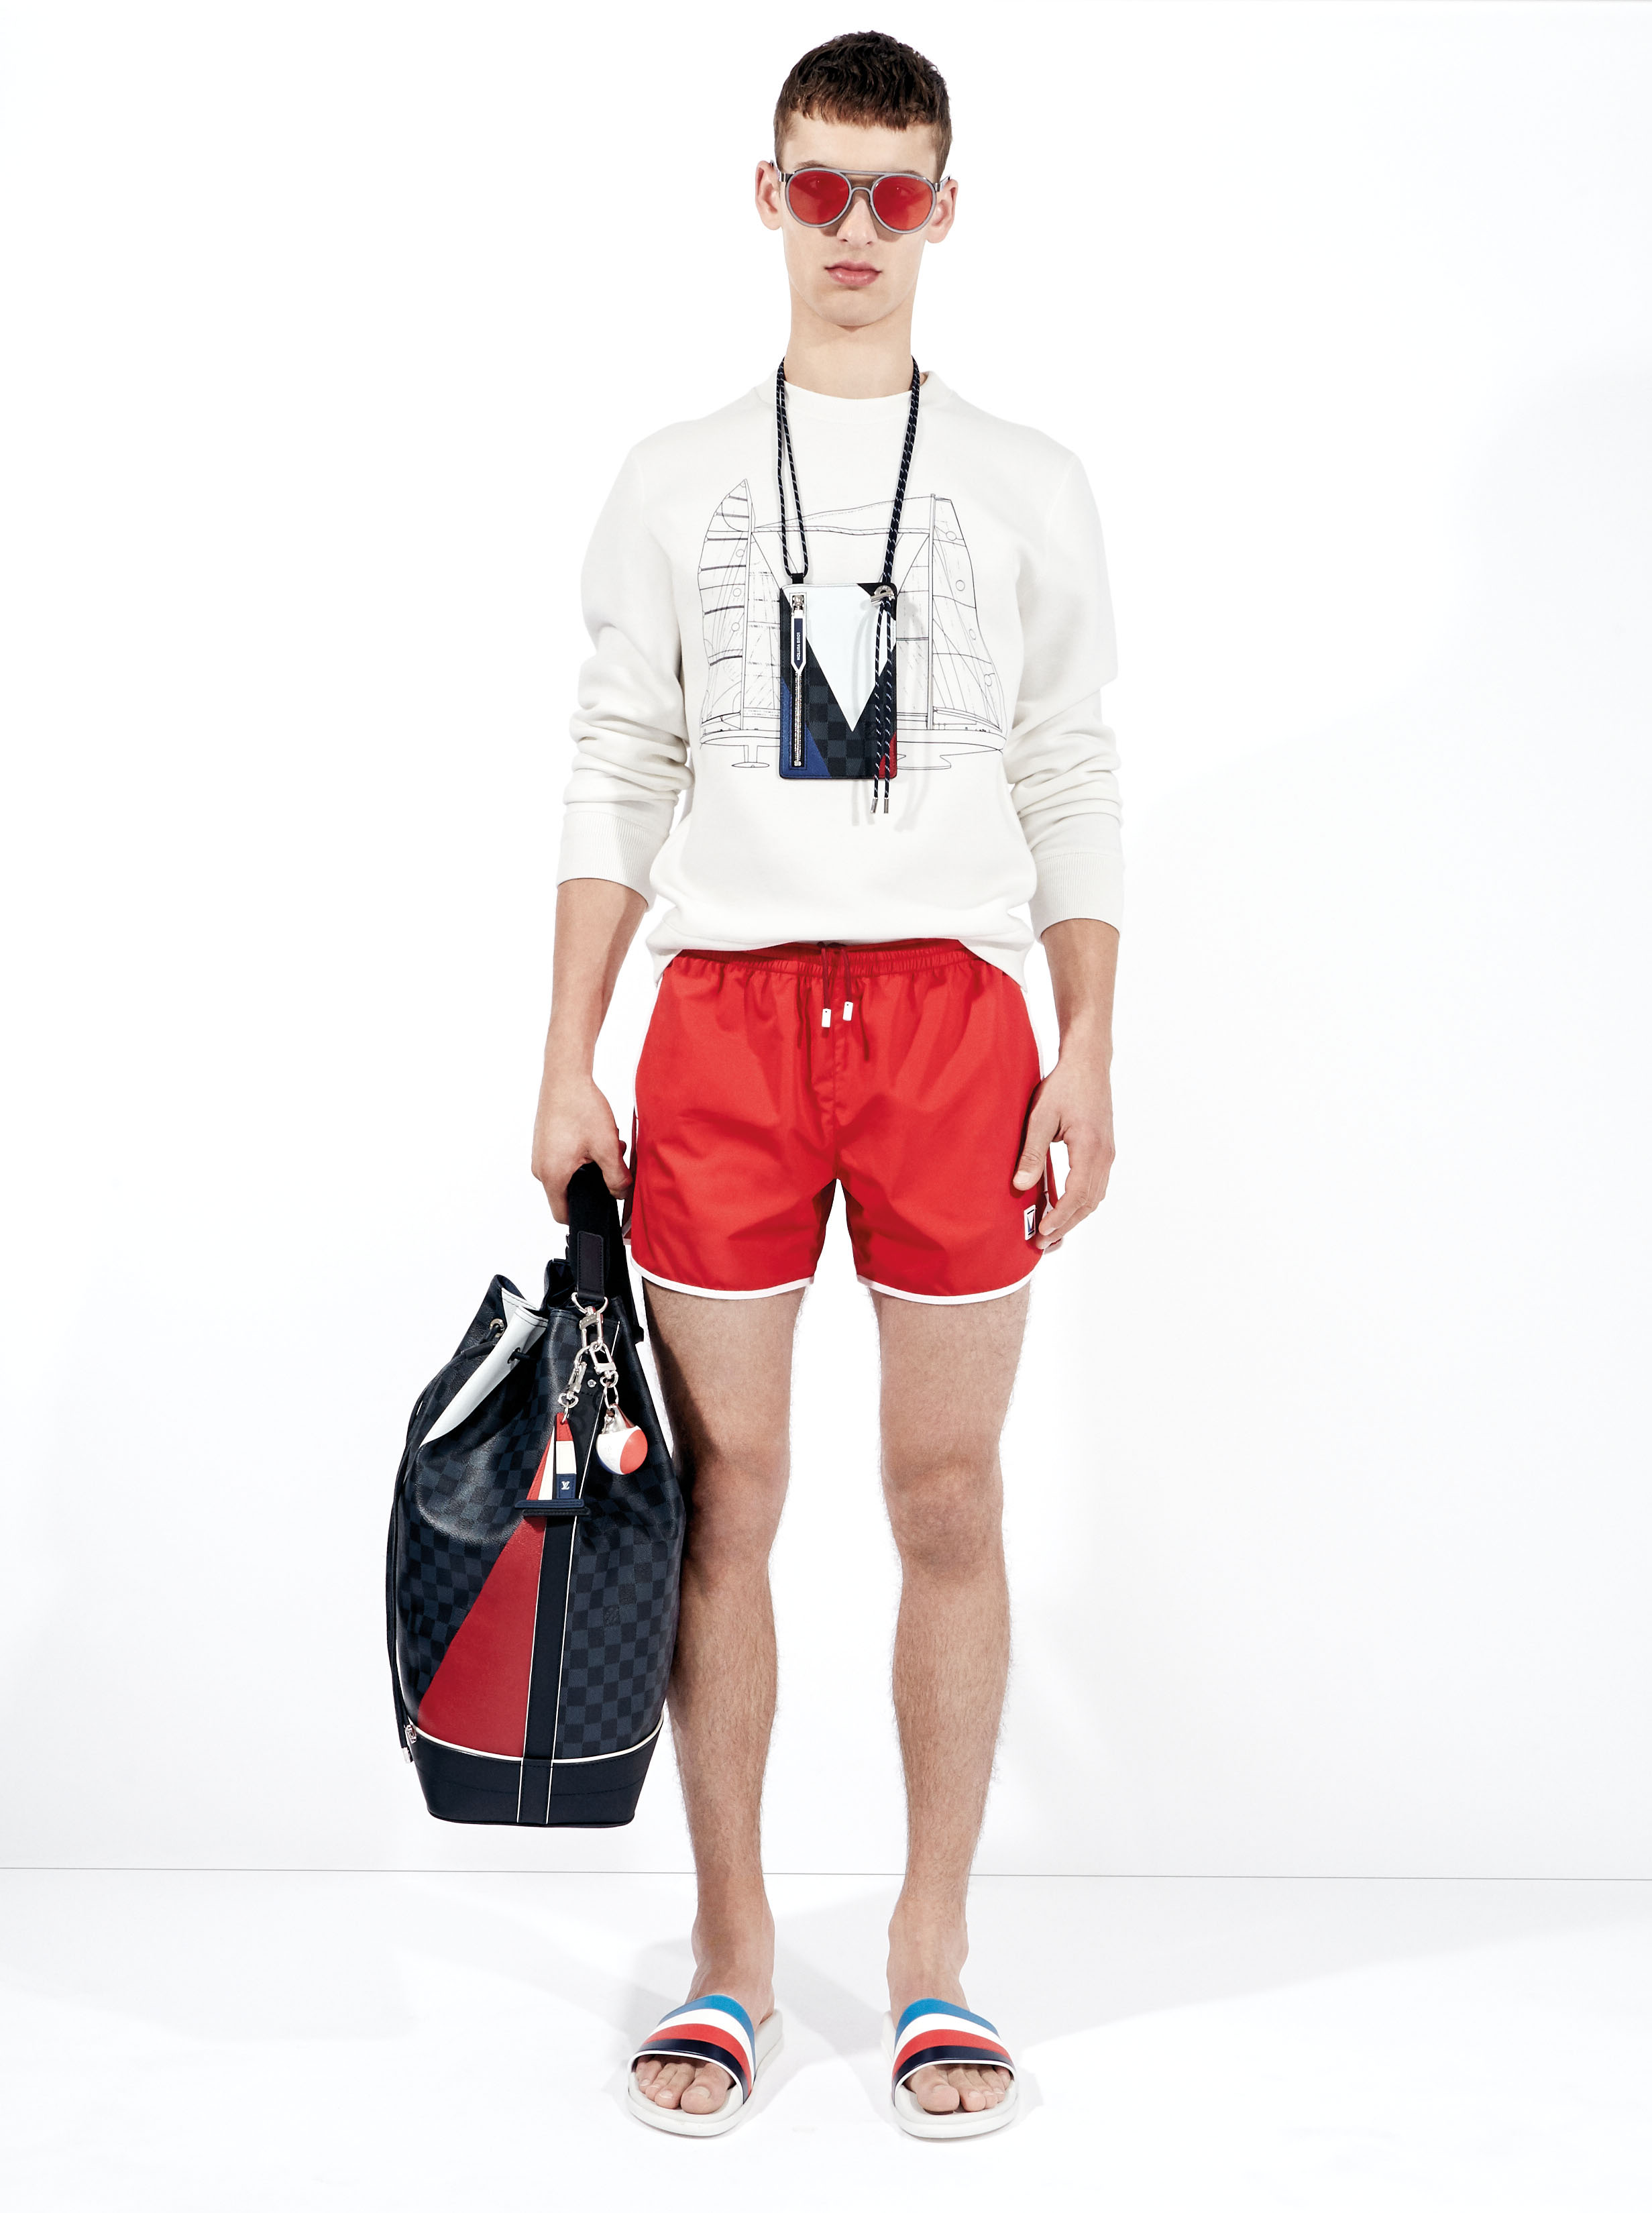 VUITTON AMERICA'S CUP​COLLECTION